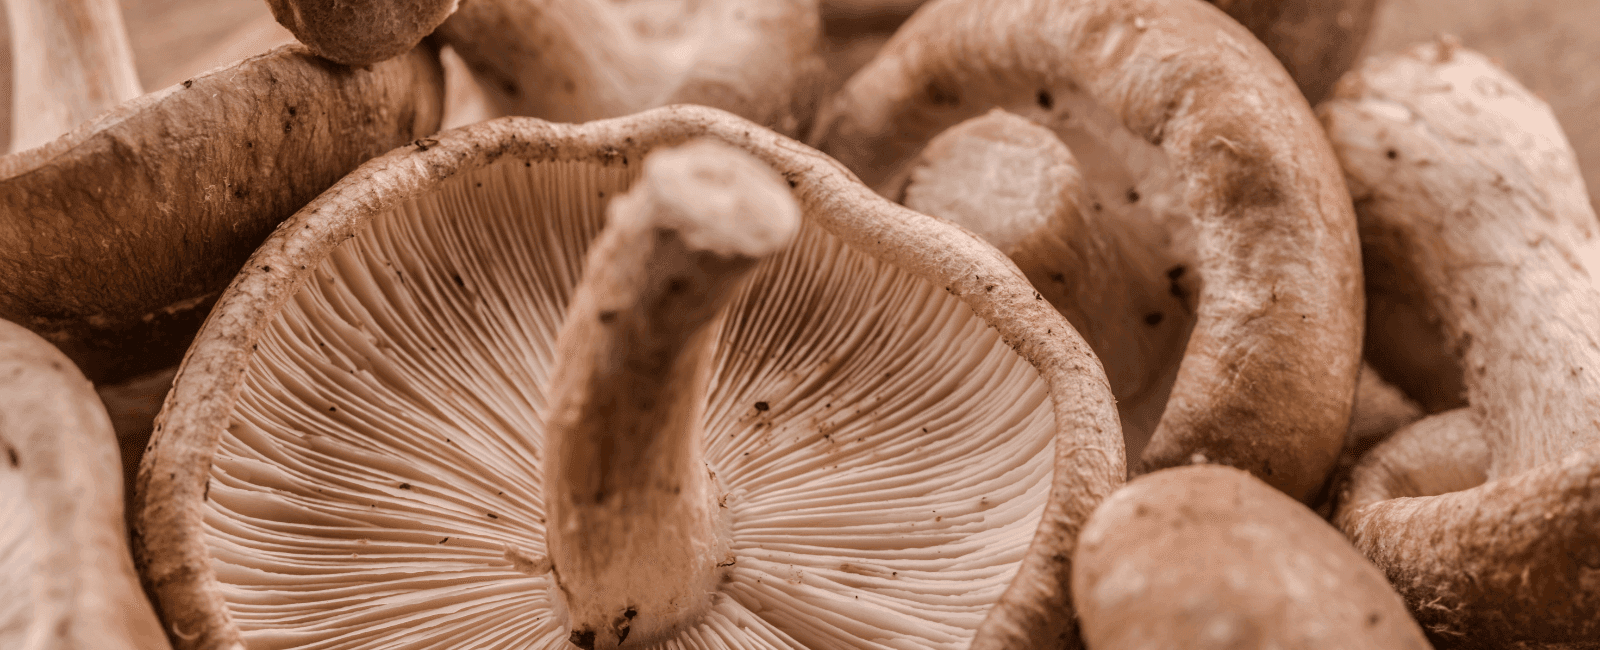 New Study Finds Link Between Regular Mushroom Consumption and Lowered Risk of Diabetes